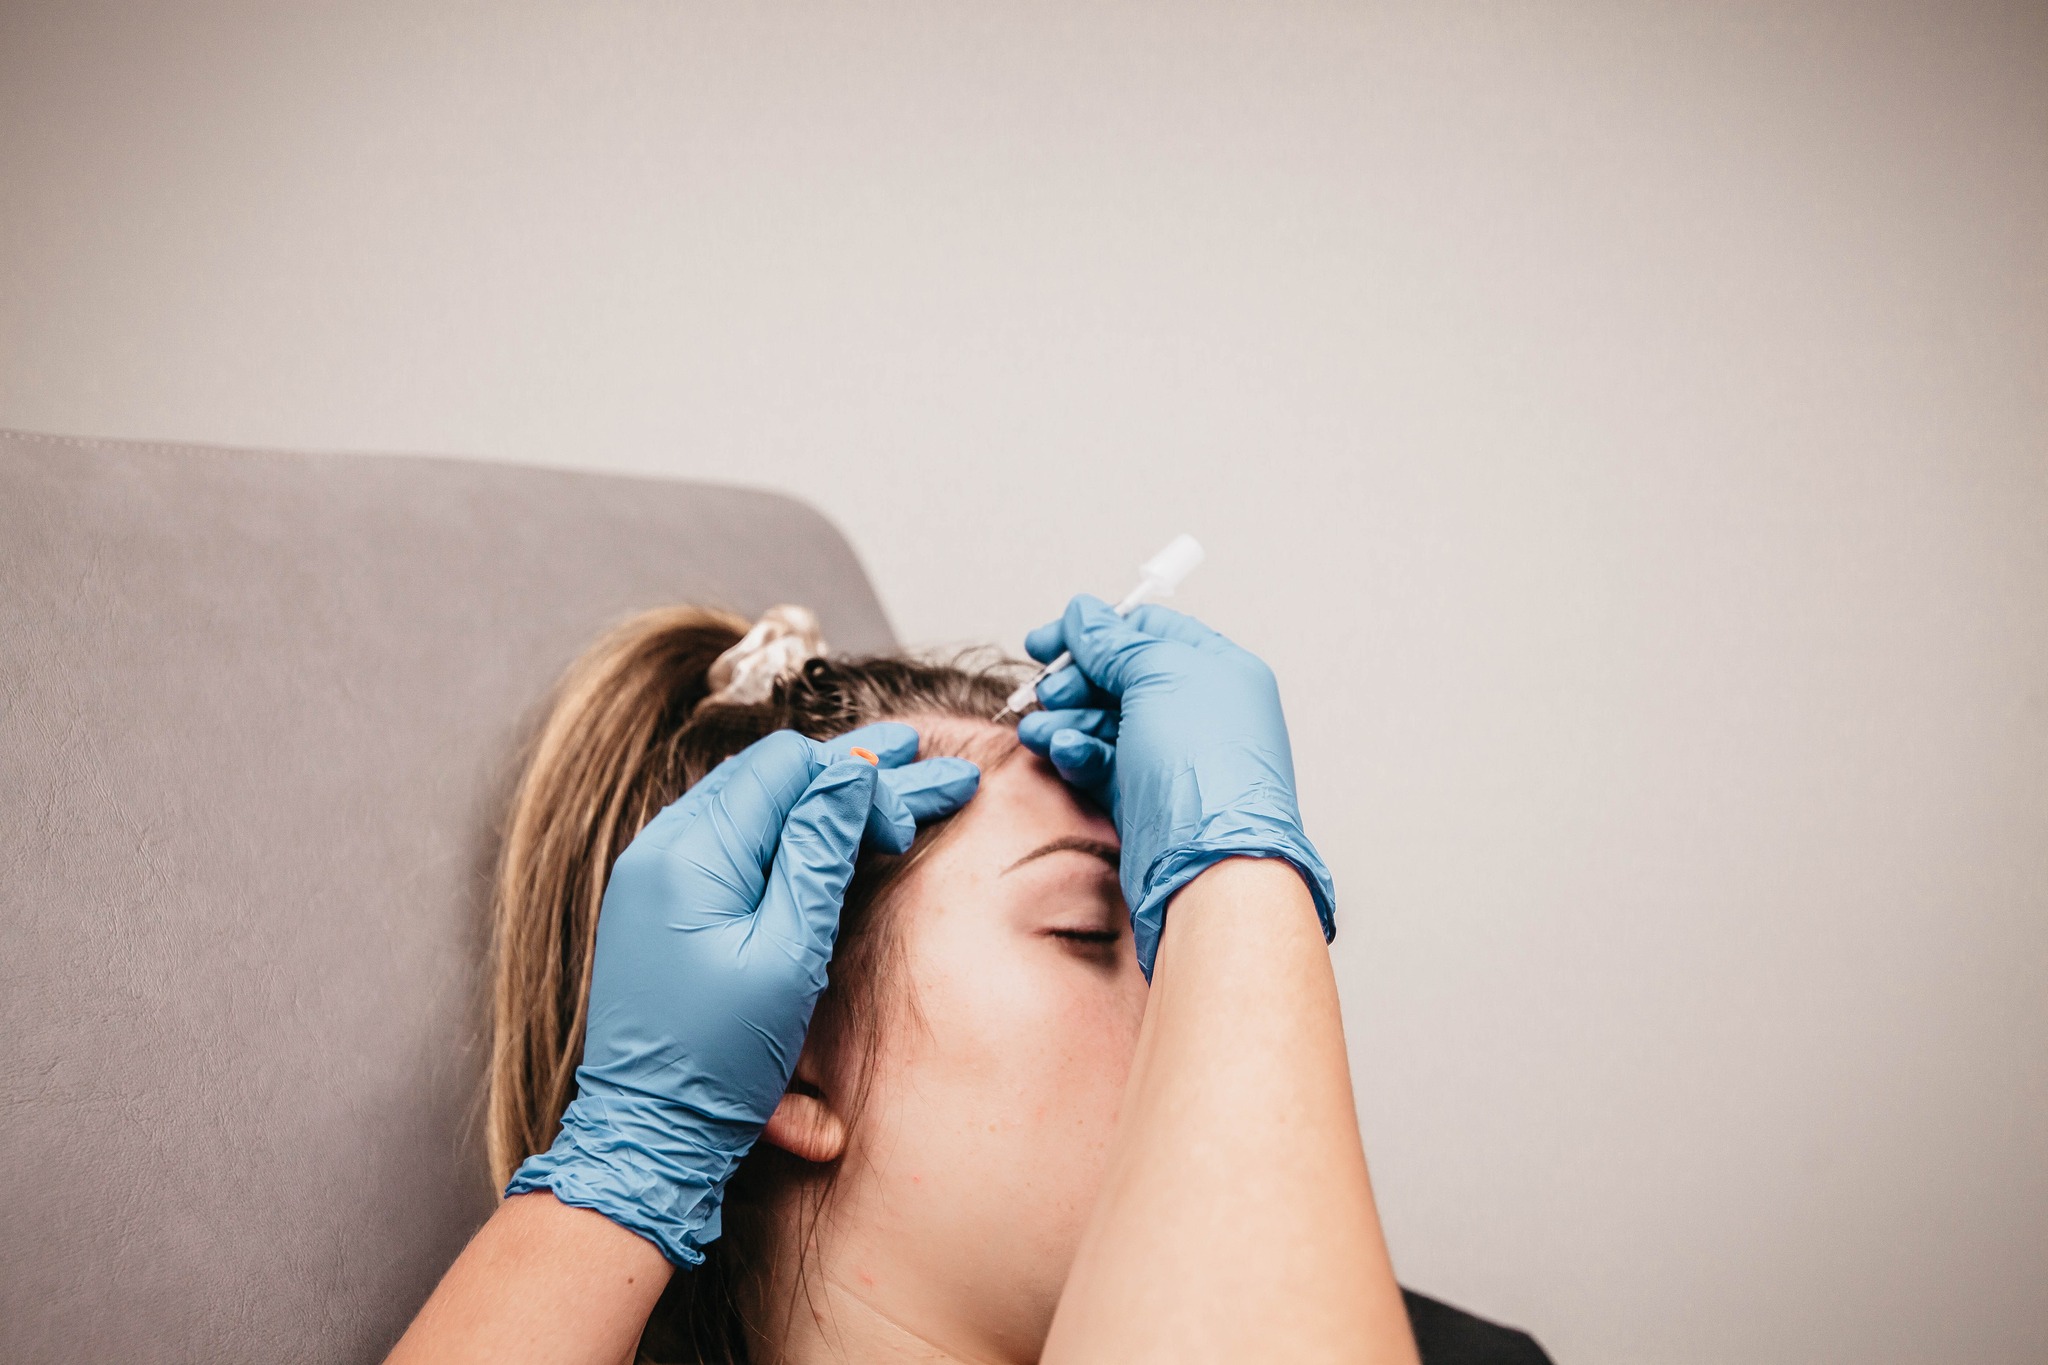 An image of a woman undergoing Hair Loss Treatment by a doctor